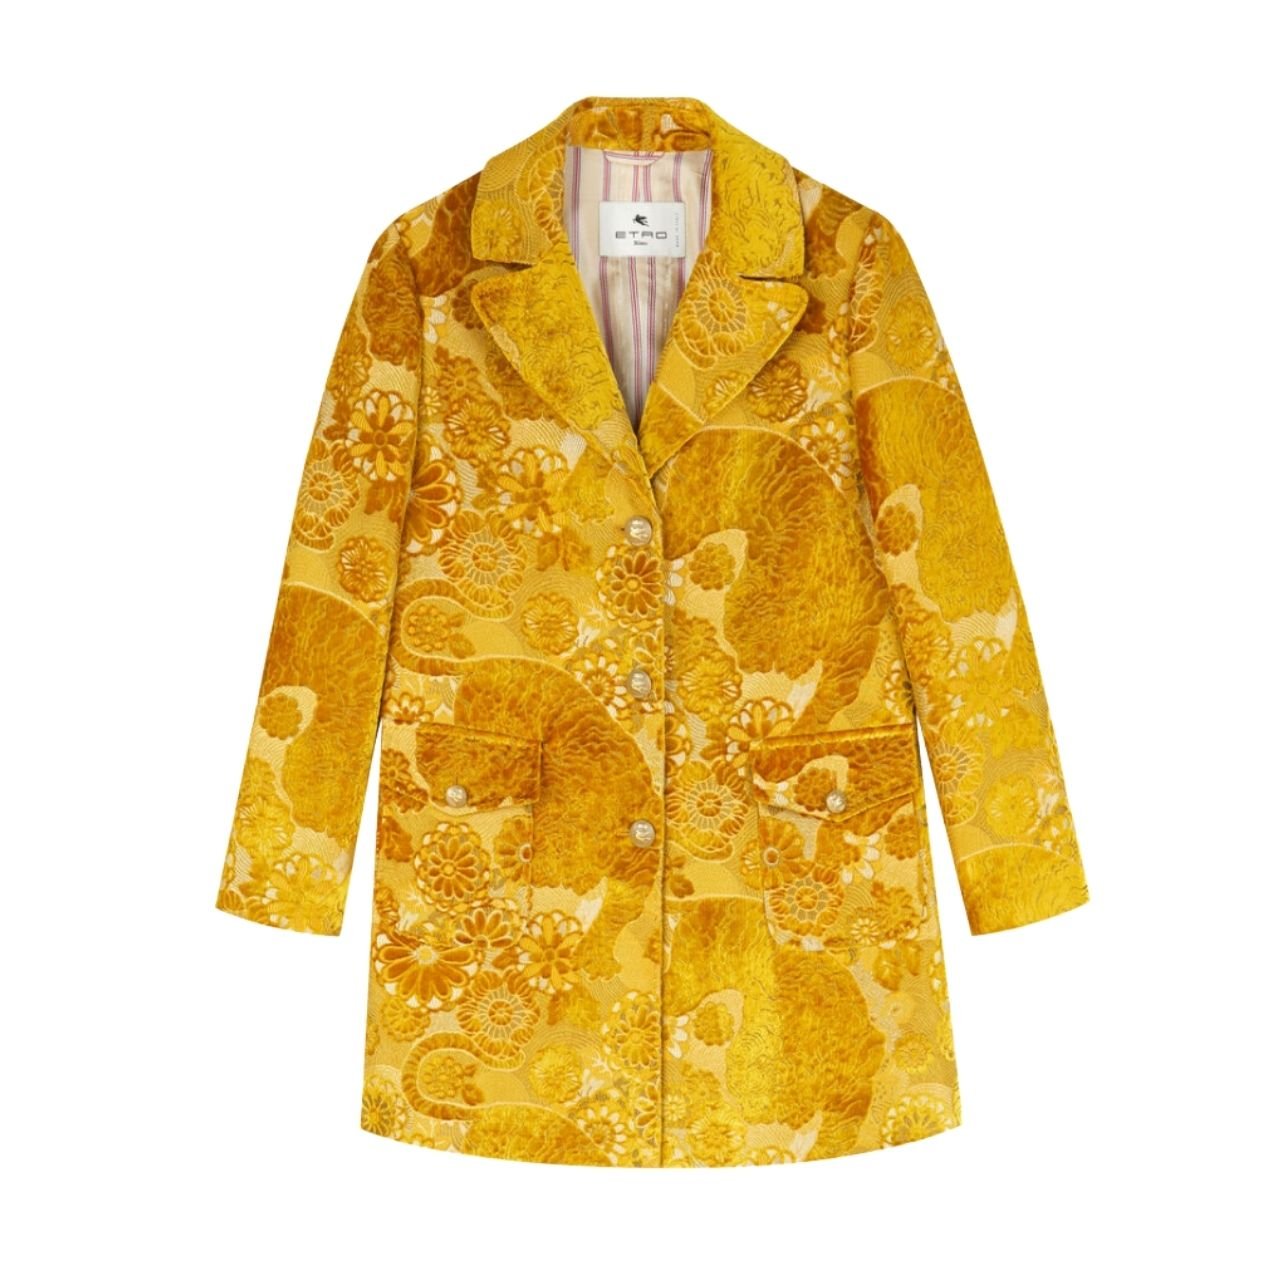 Etro yellow jacquard style coat with floral detailing